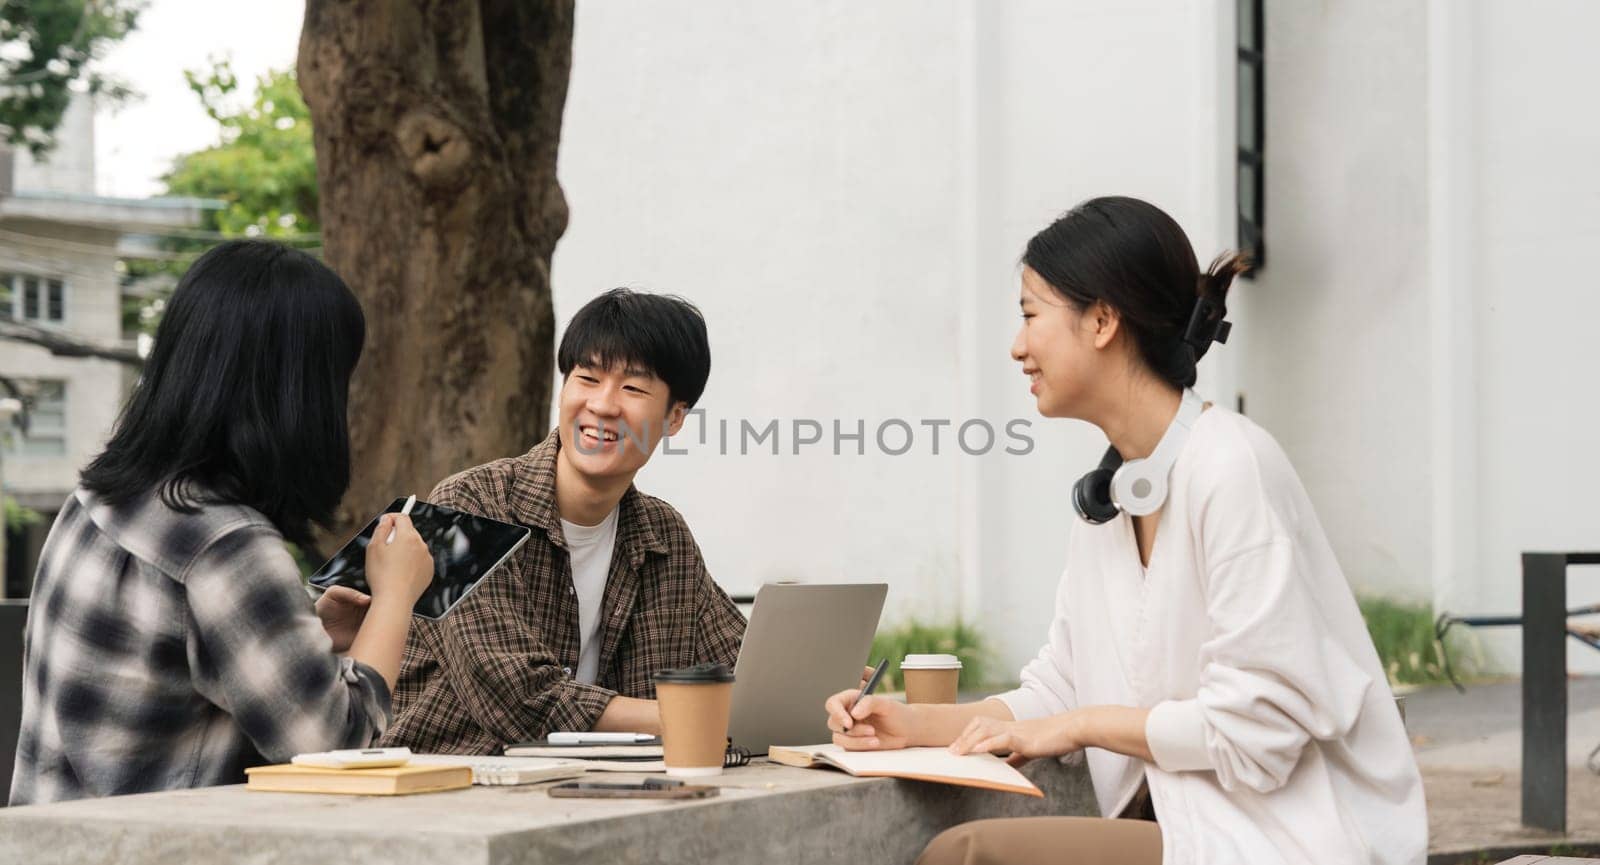 Group of happy young Asian college students sitting on a on the cement table, looking at a laptop screen, discussing and brainstorming on their university project together.